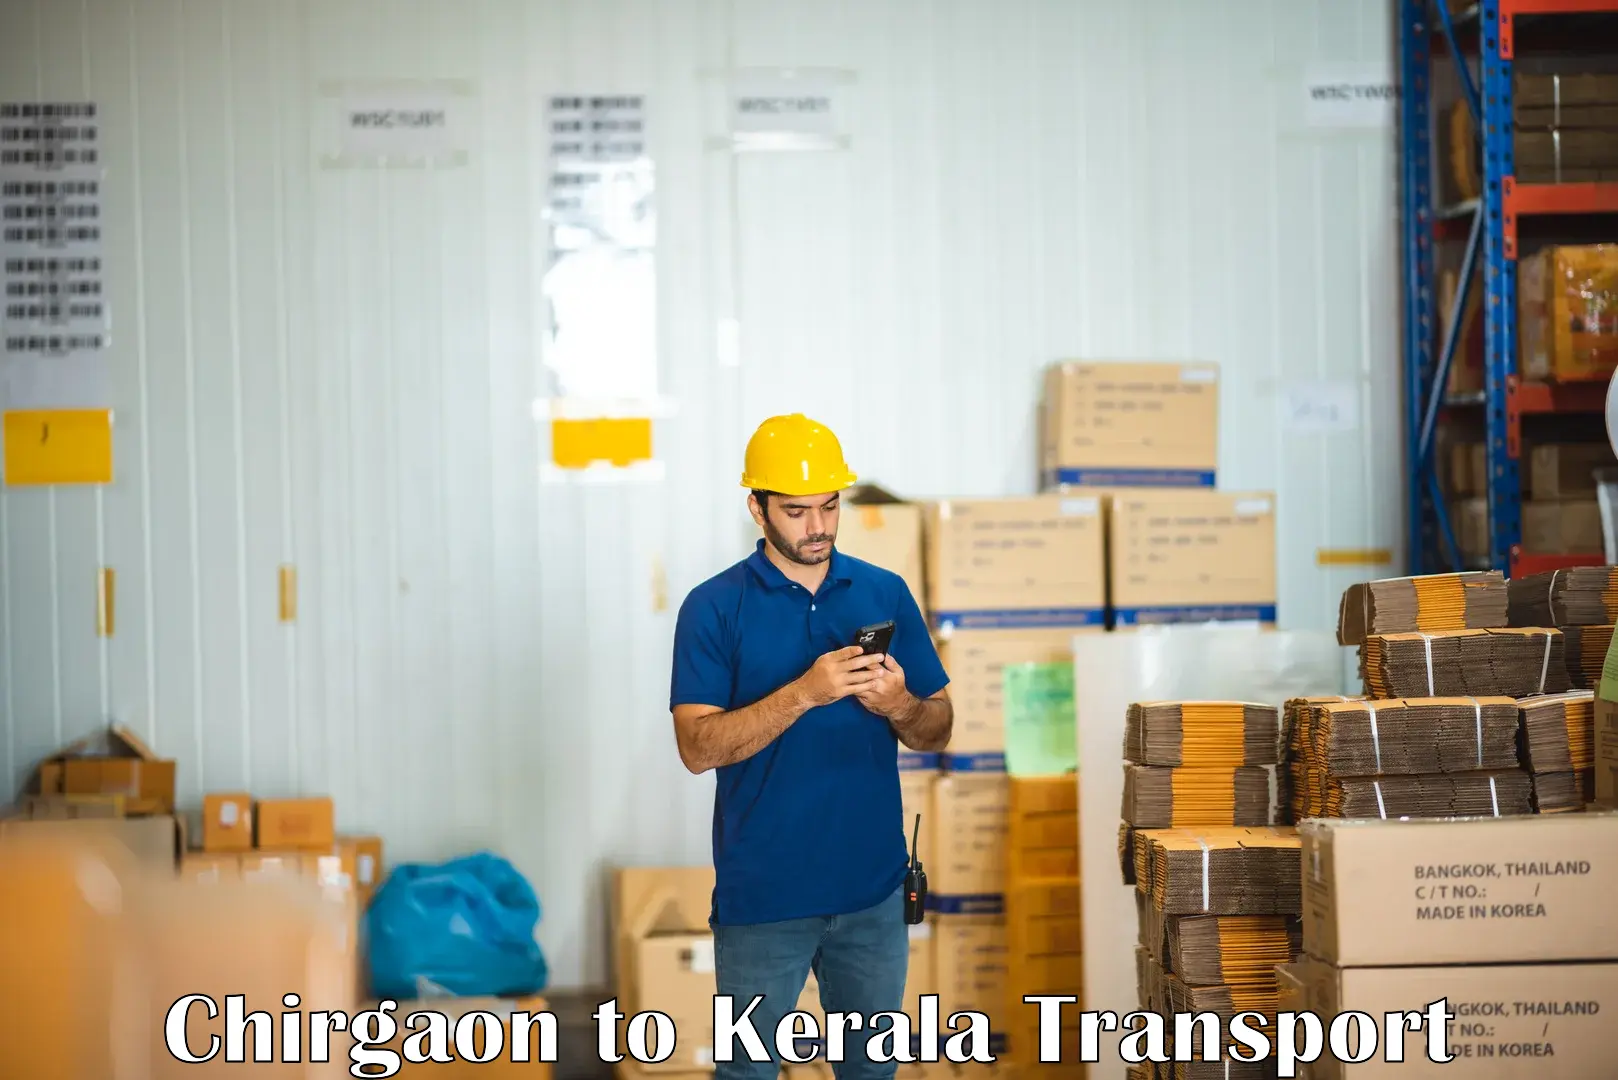 Container transport service Chirgaon to Perinthalmanna